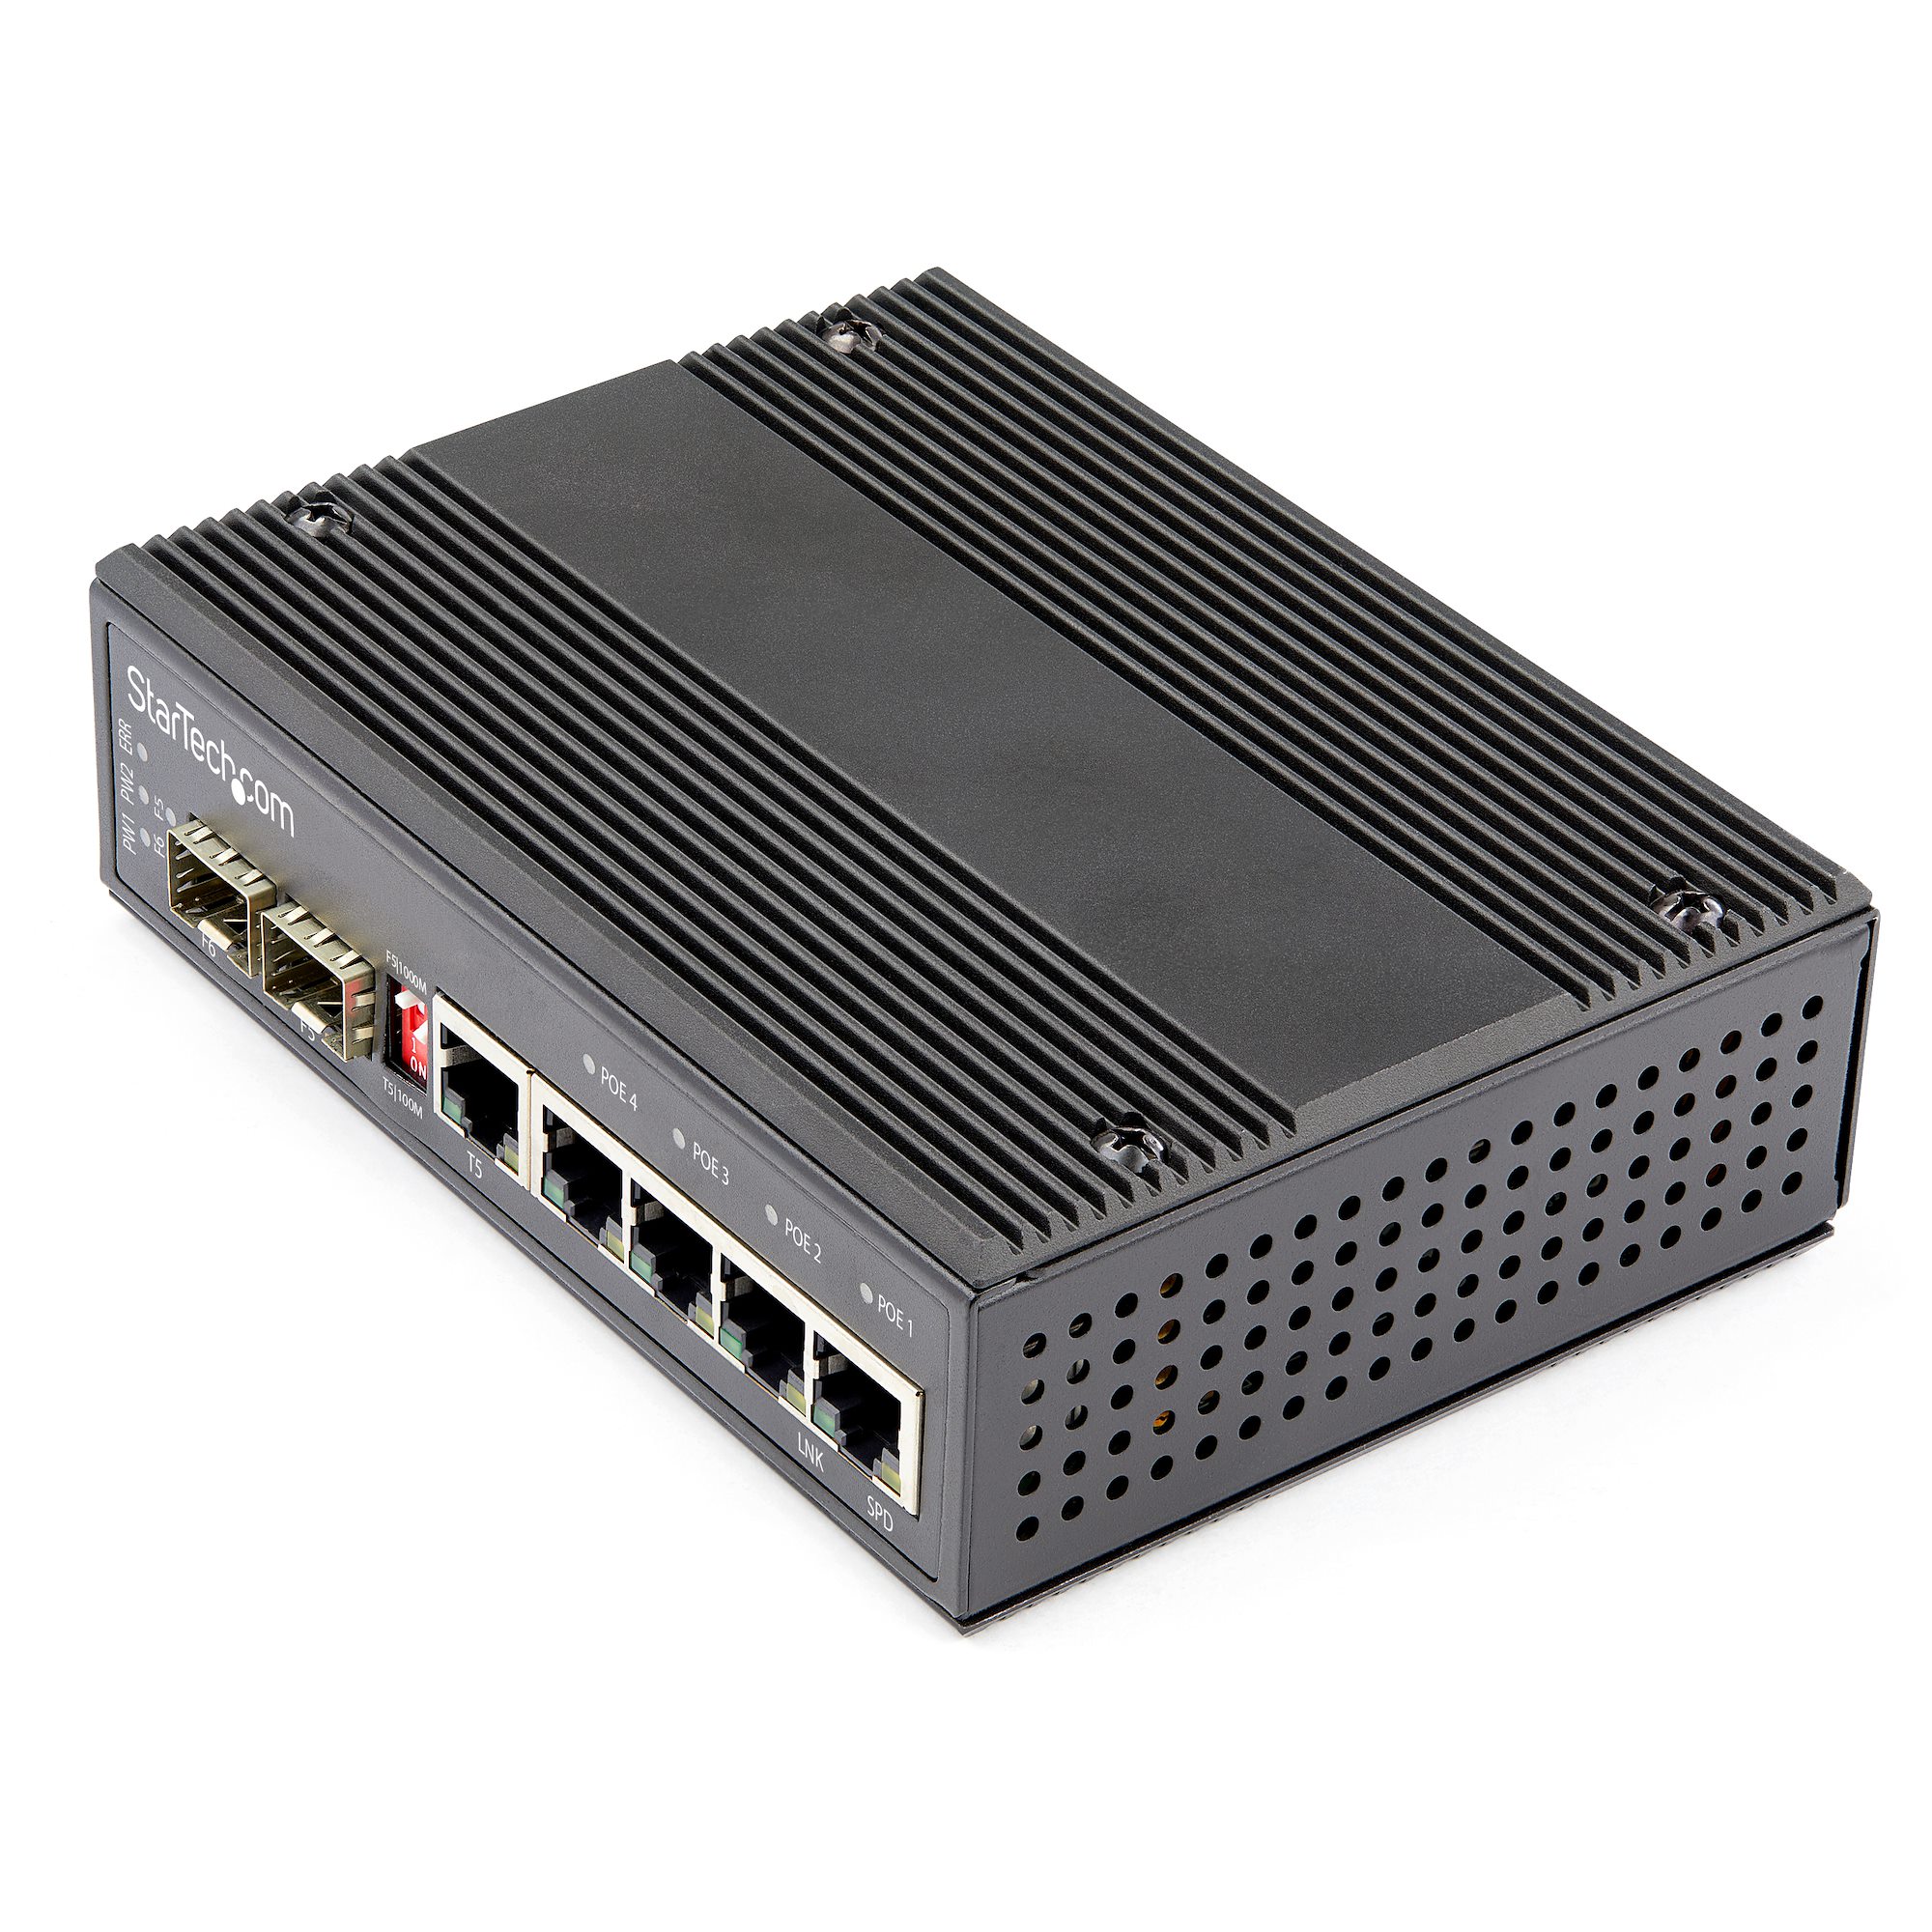 PoE Switches, PoE+ Switches, Gigabit PoE Ethernet Switch with Fiber